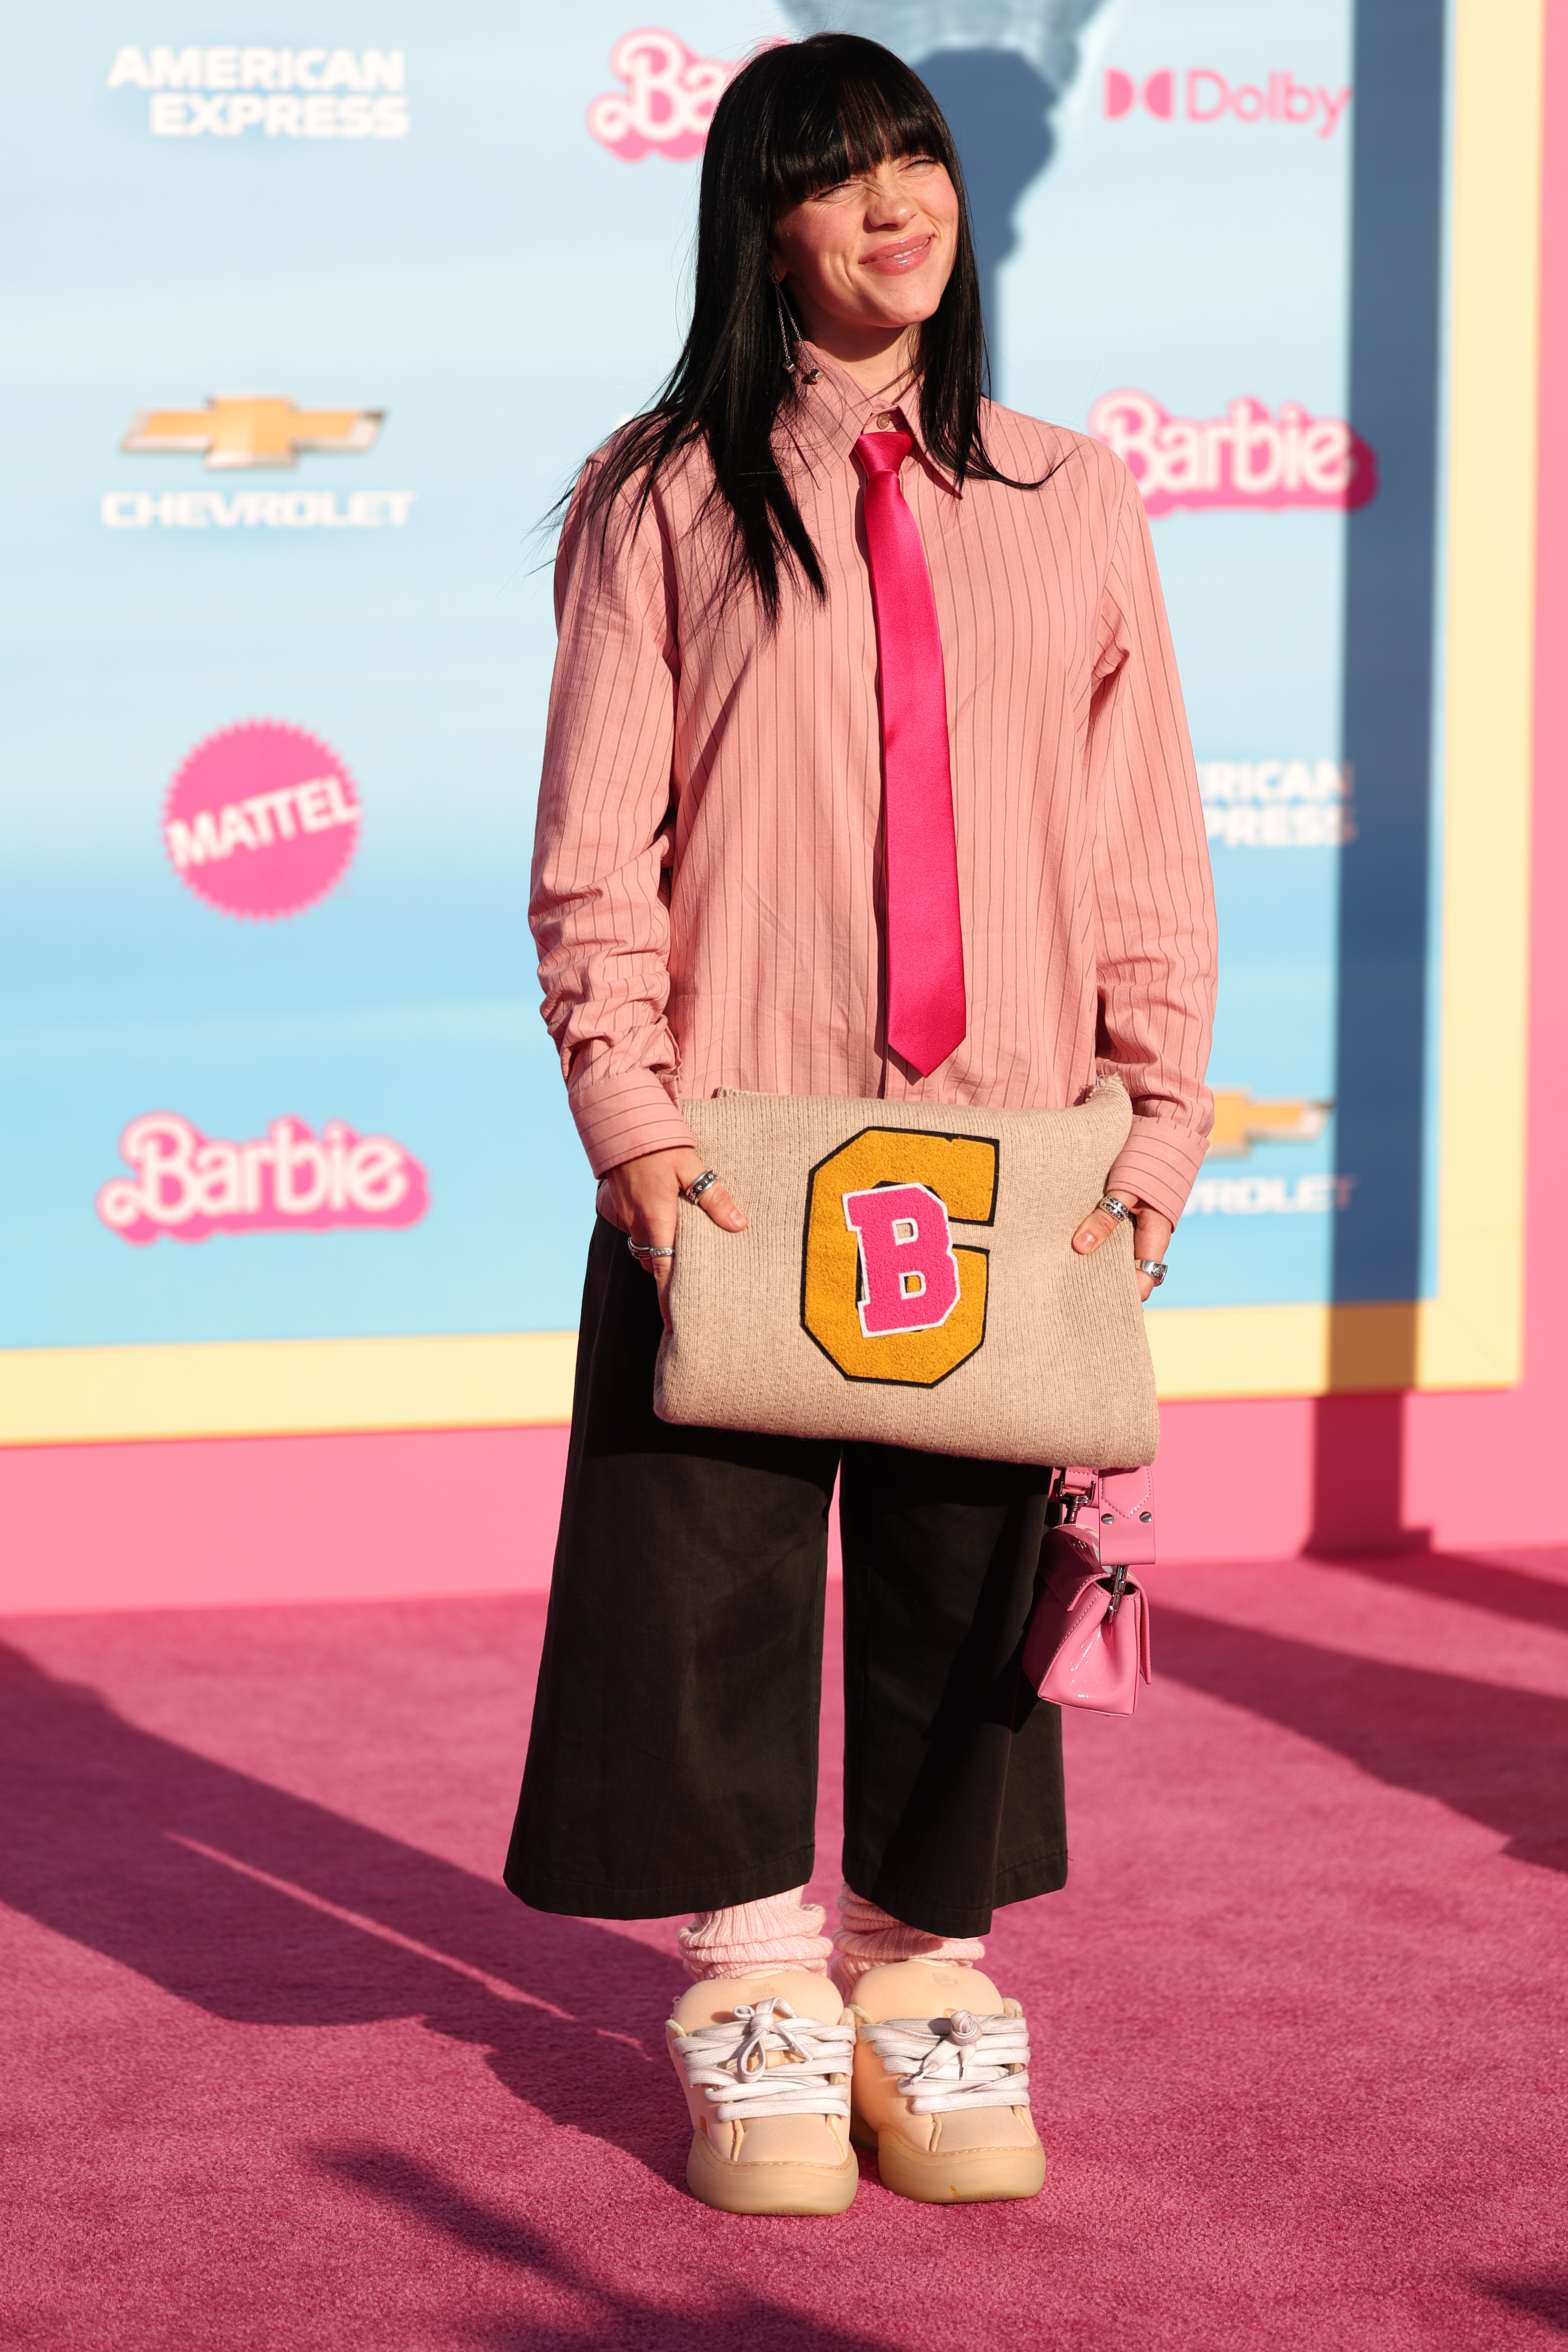 Billie Eilish at the premiere of "Barbie" held at Shrine Auditorium and Expo Hall on July 9, 2023, in Los Angeles, California. | Source: Getty Images